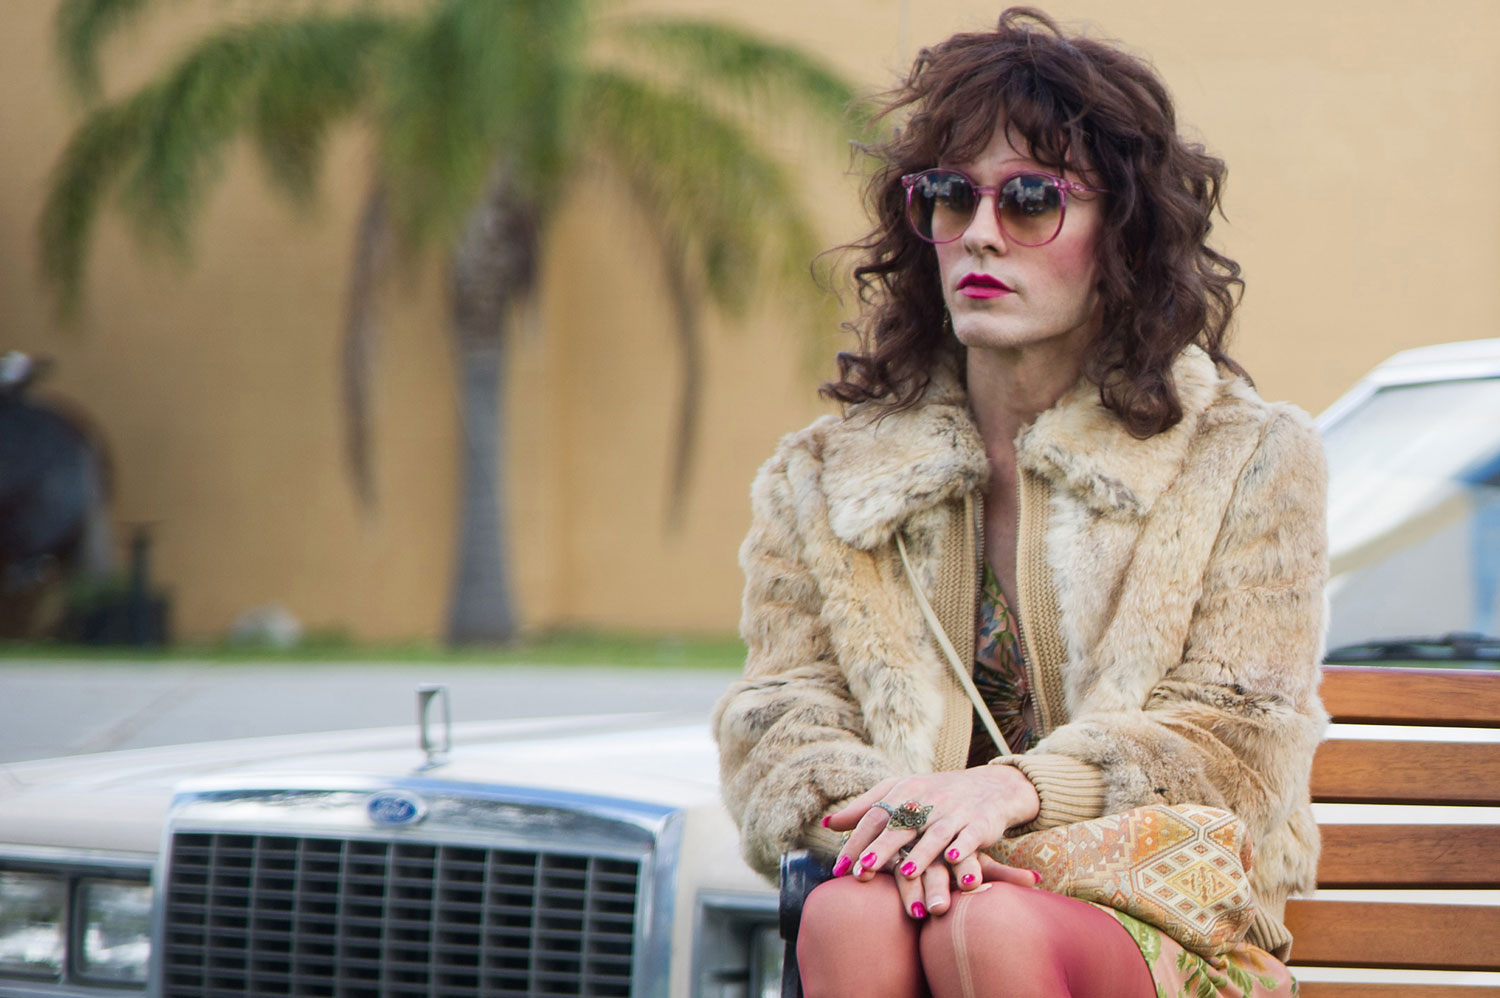 Jared Leto as Rayon in Dallas Buyers Club. (Anne Marie Fox&amp;mdash;Focus Features)